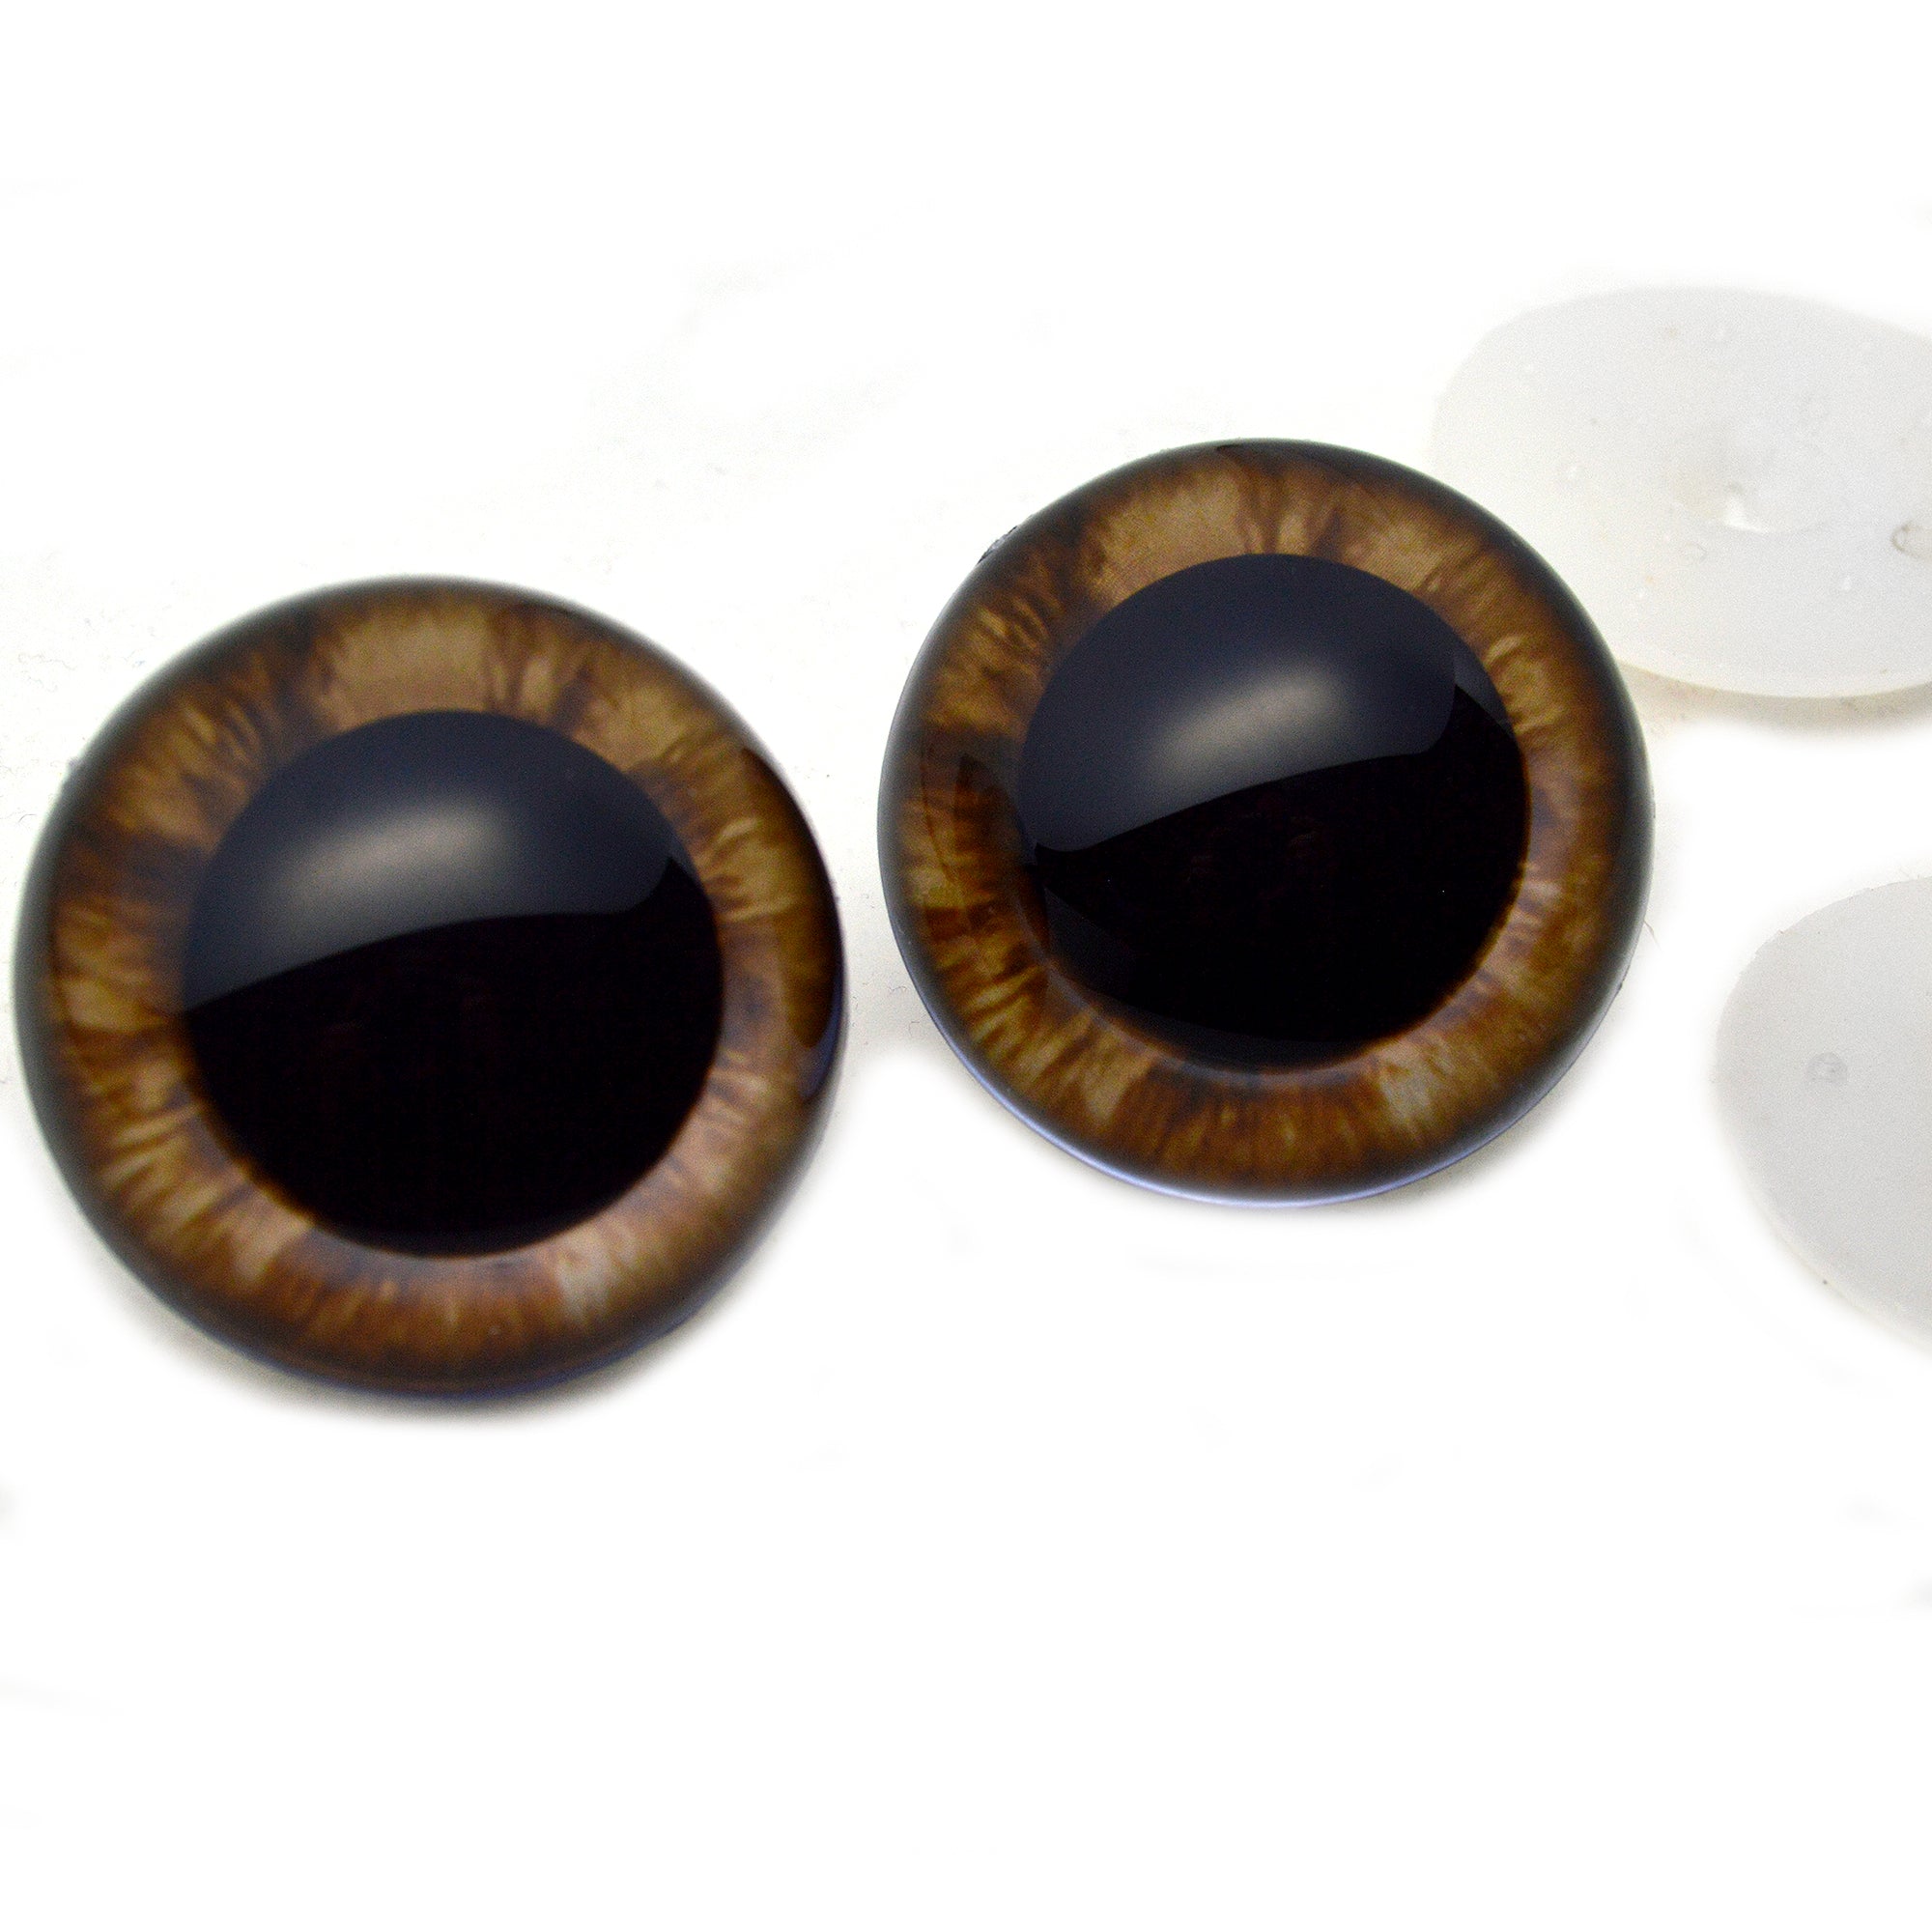 8mm Glass Like Eyes Safety Eyes With Plastic Backs for Teddy Bear/animal  Making 